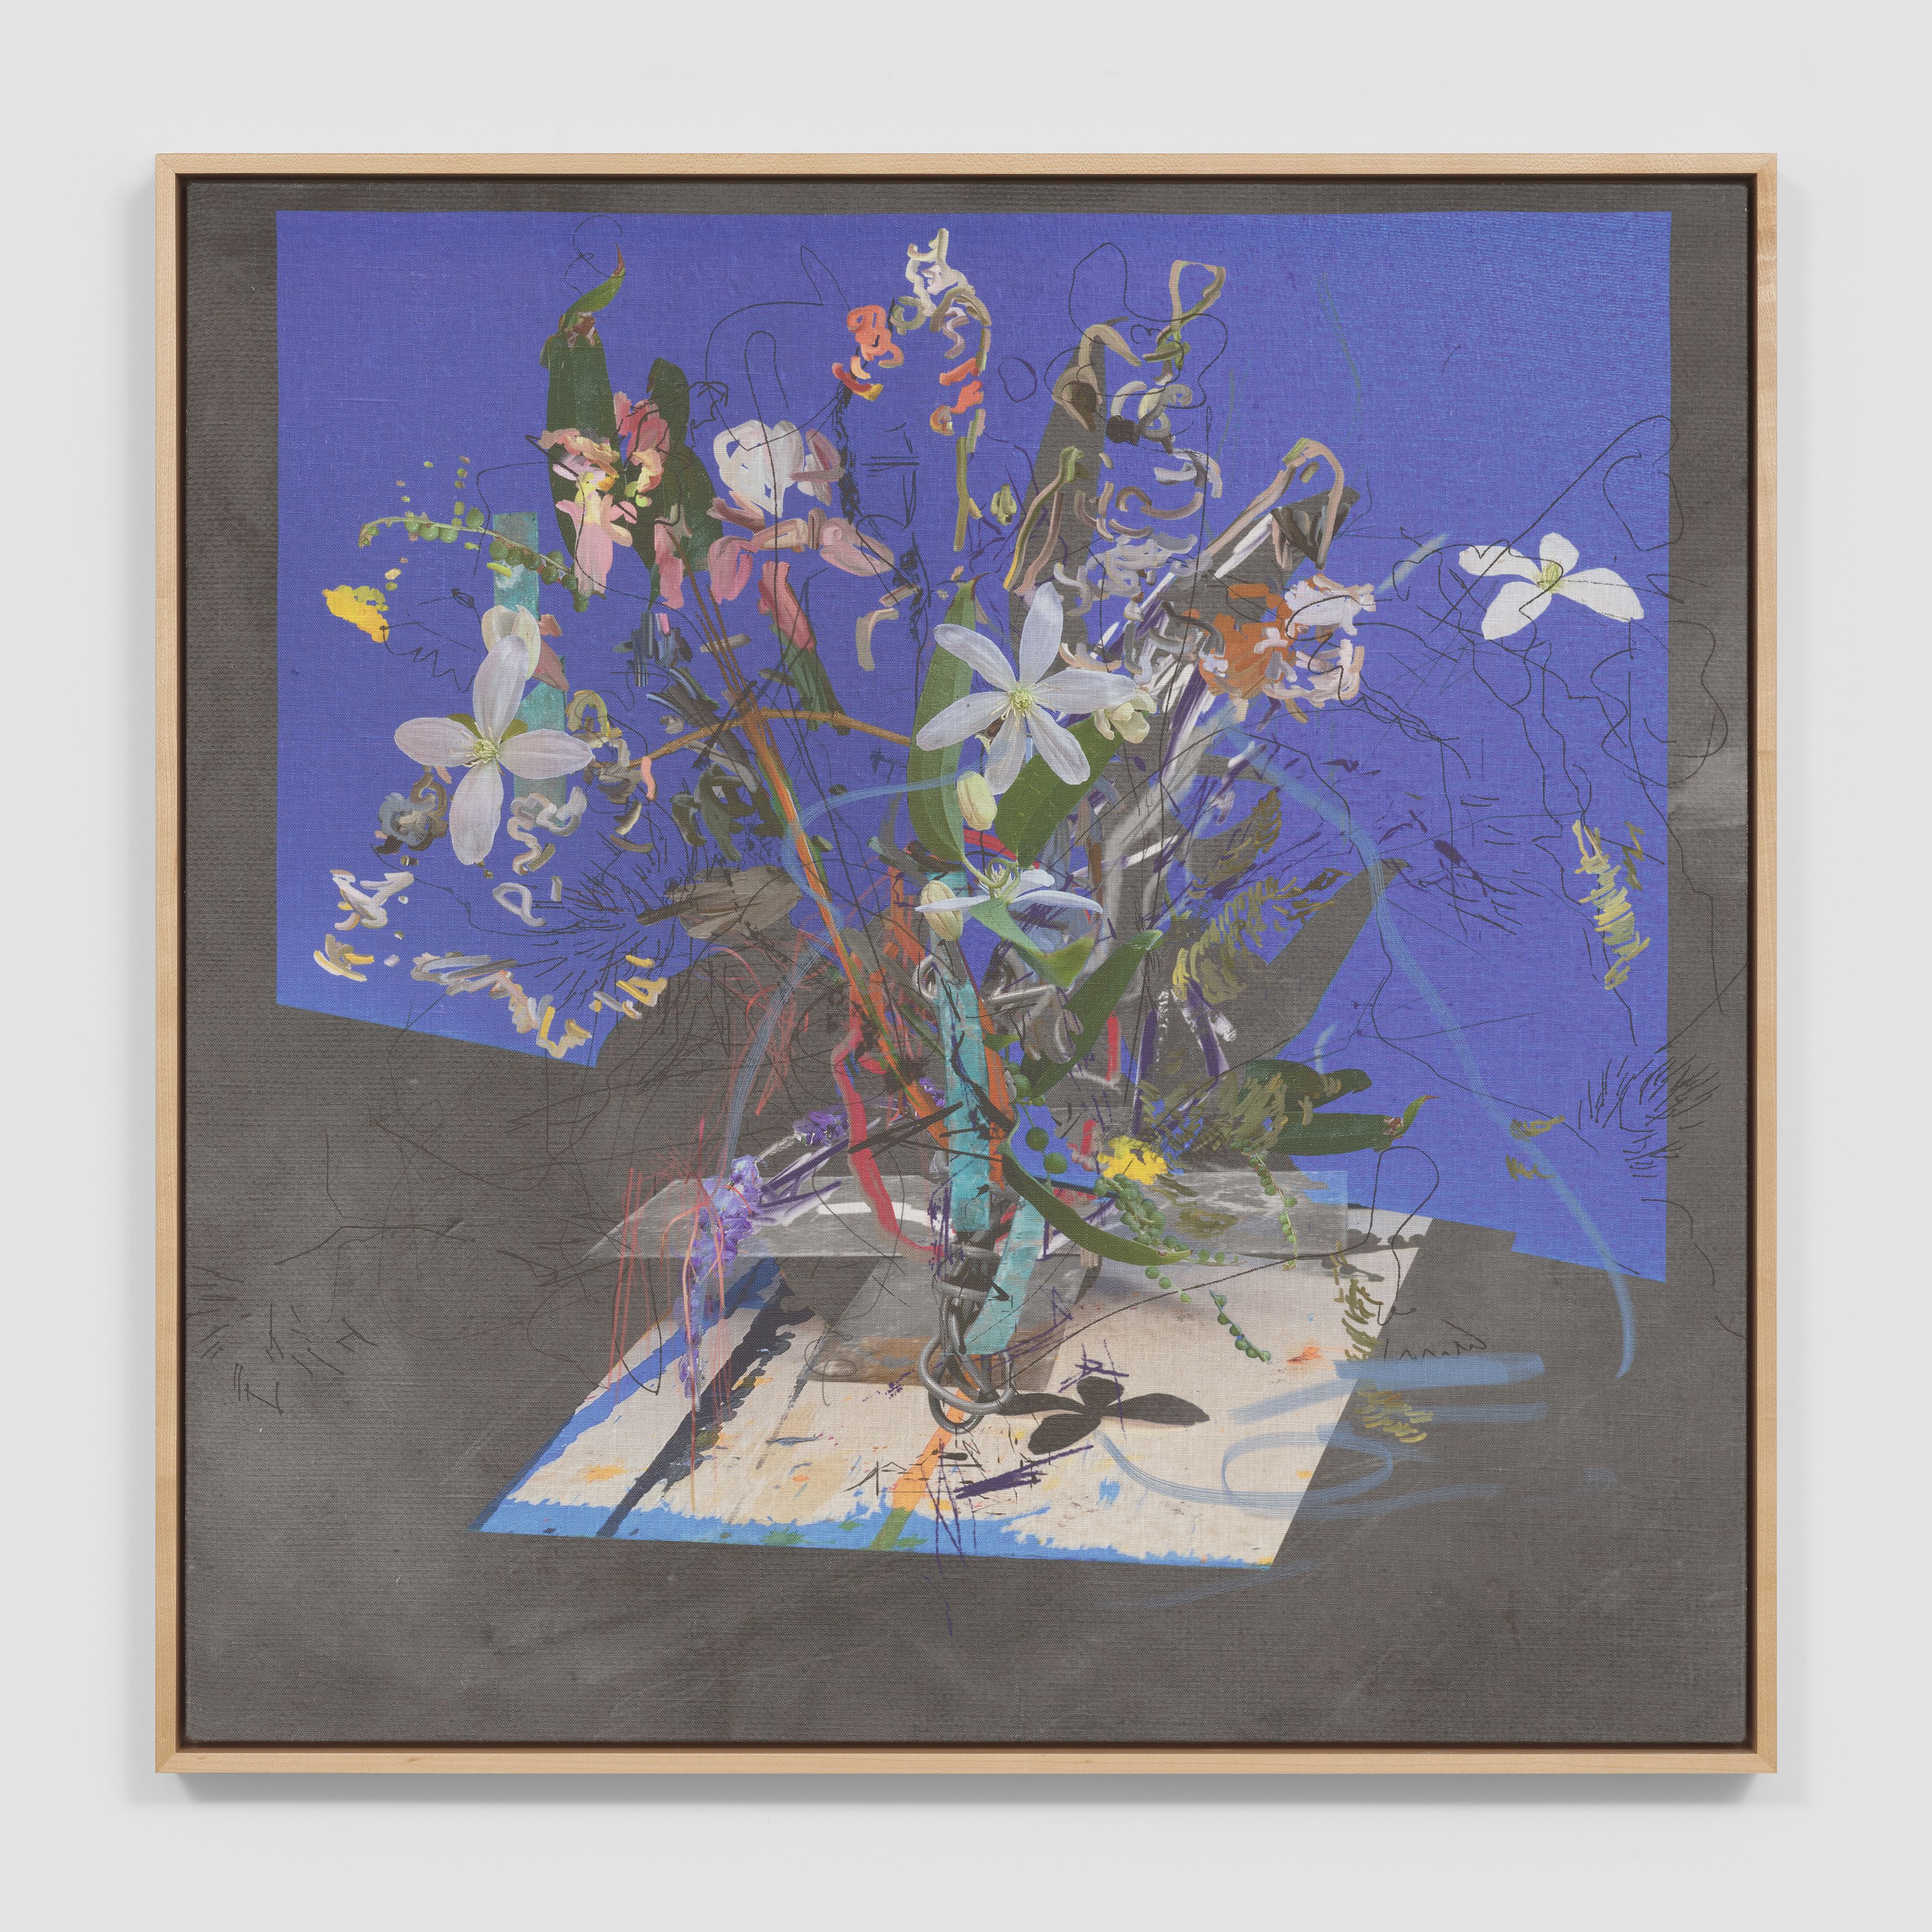 Petra Cortright, WRITING PRIVATE EYE_SWINGERS suplemento alimentario+ong+espaÒa_striptease previews, 2021, digital painting on Belgian linen, 33 x 33 in. (83.82 x 83.82 cm)